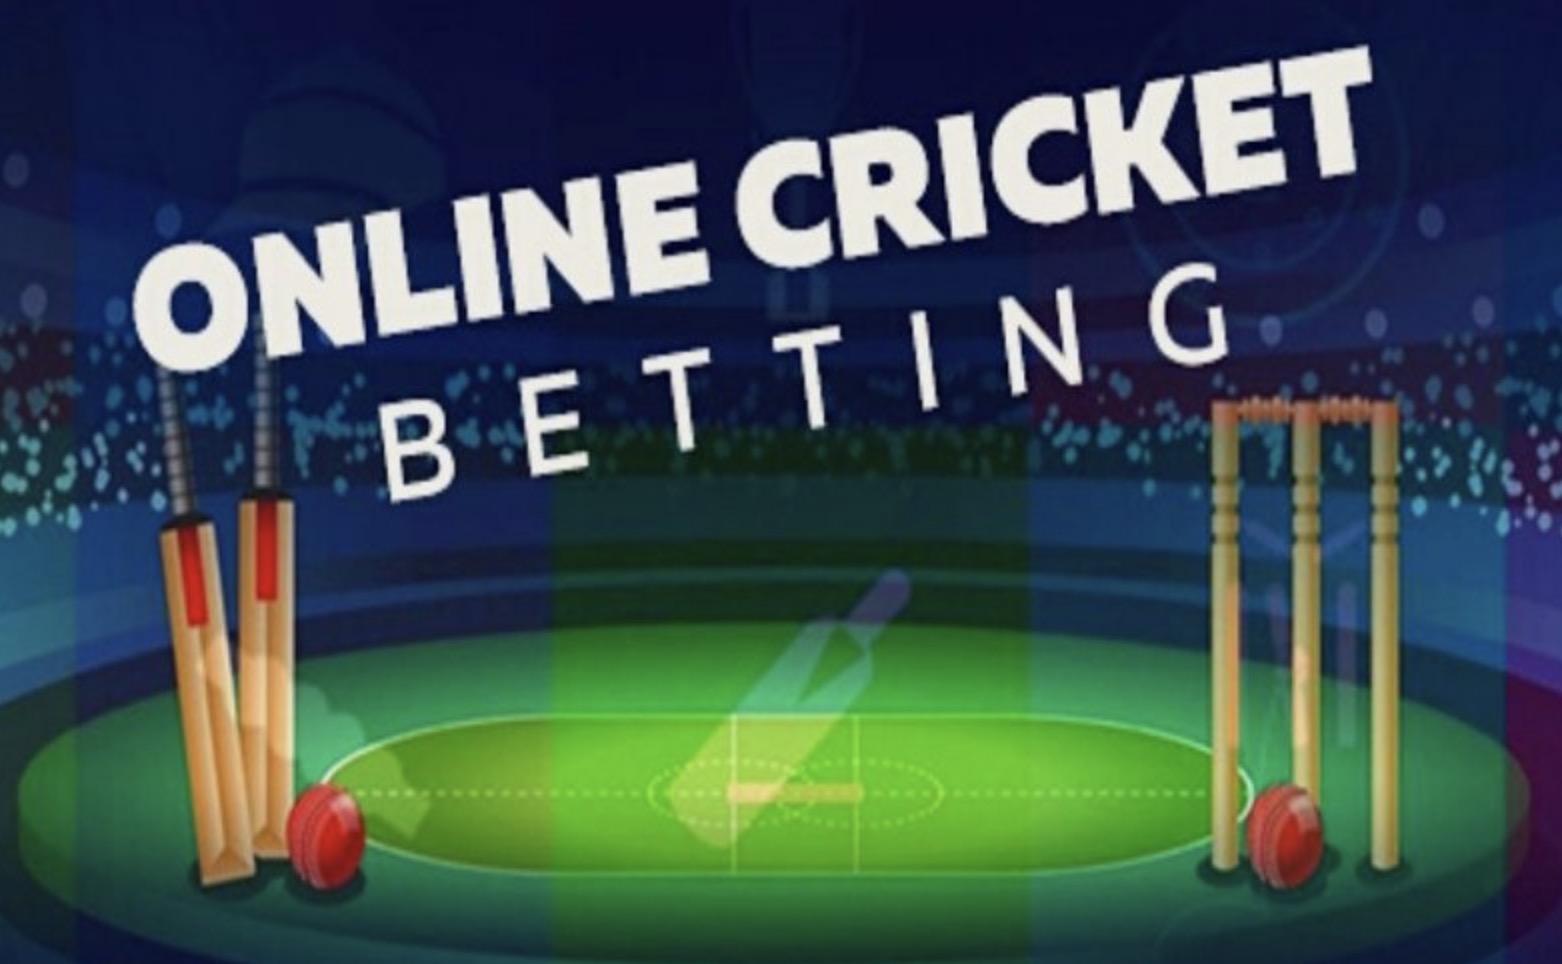 Online Cricket Betting In India (5)